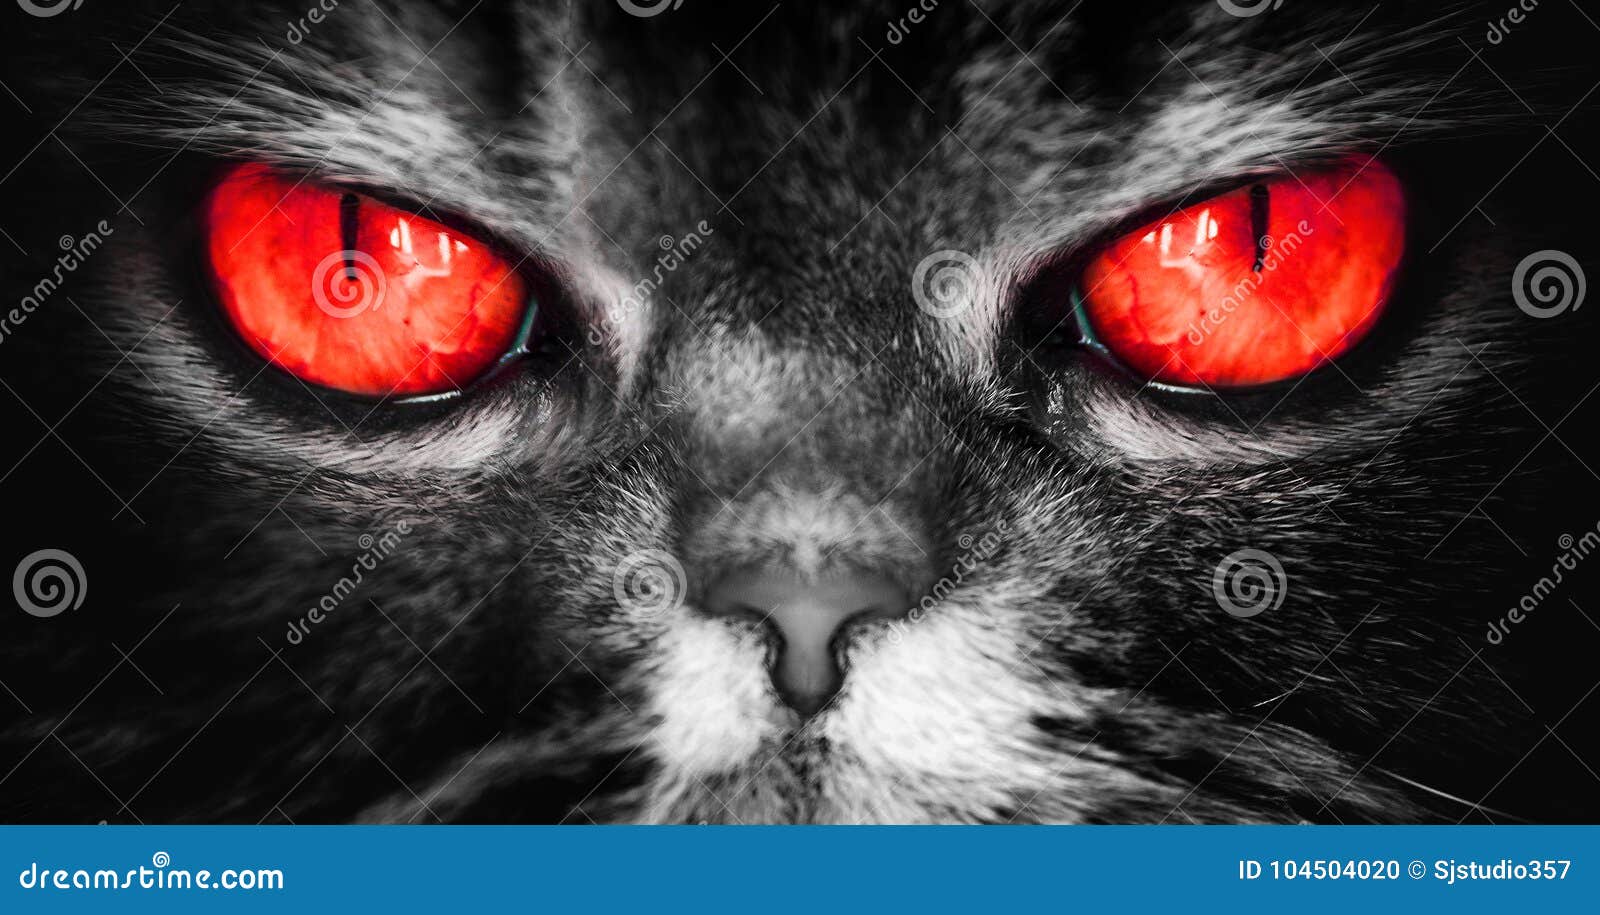 A with Red Eyes, an Evil Terrible Face from Nightmare, Looks Directly into the Soul, Stock Photo - Image of monster, devil: 104504020